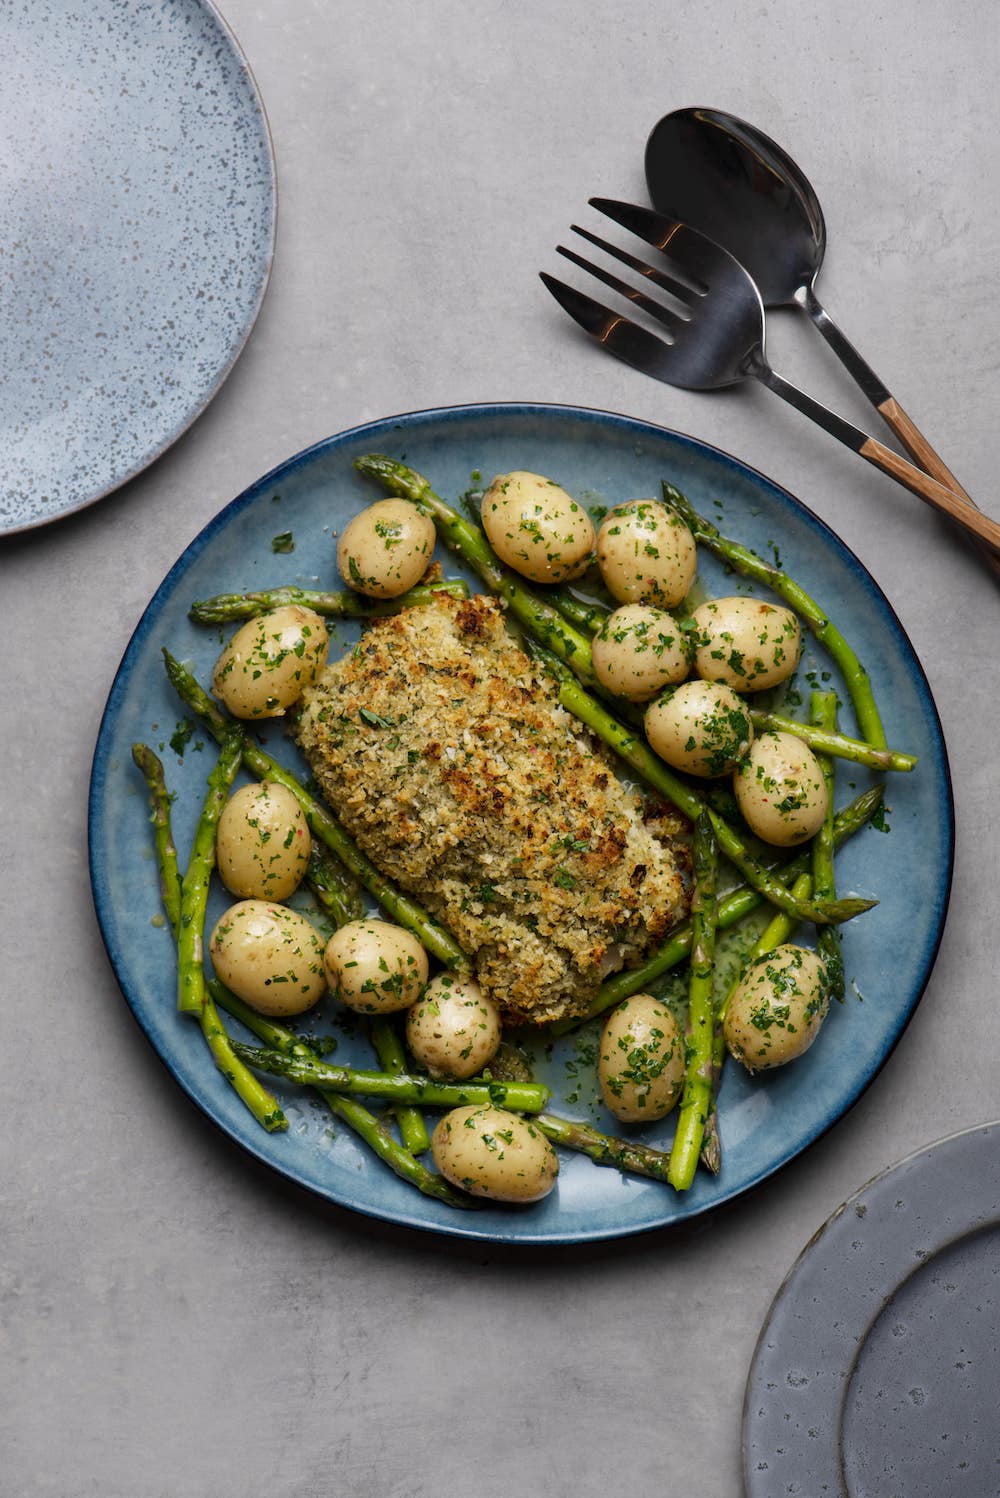 Cod loin baked with a lemon and herb crust, buttery new potatoes and asparagus